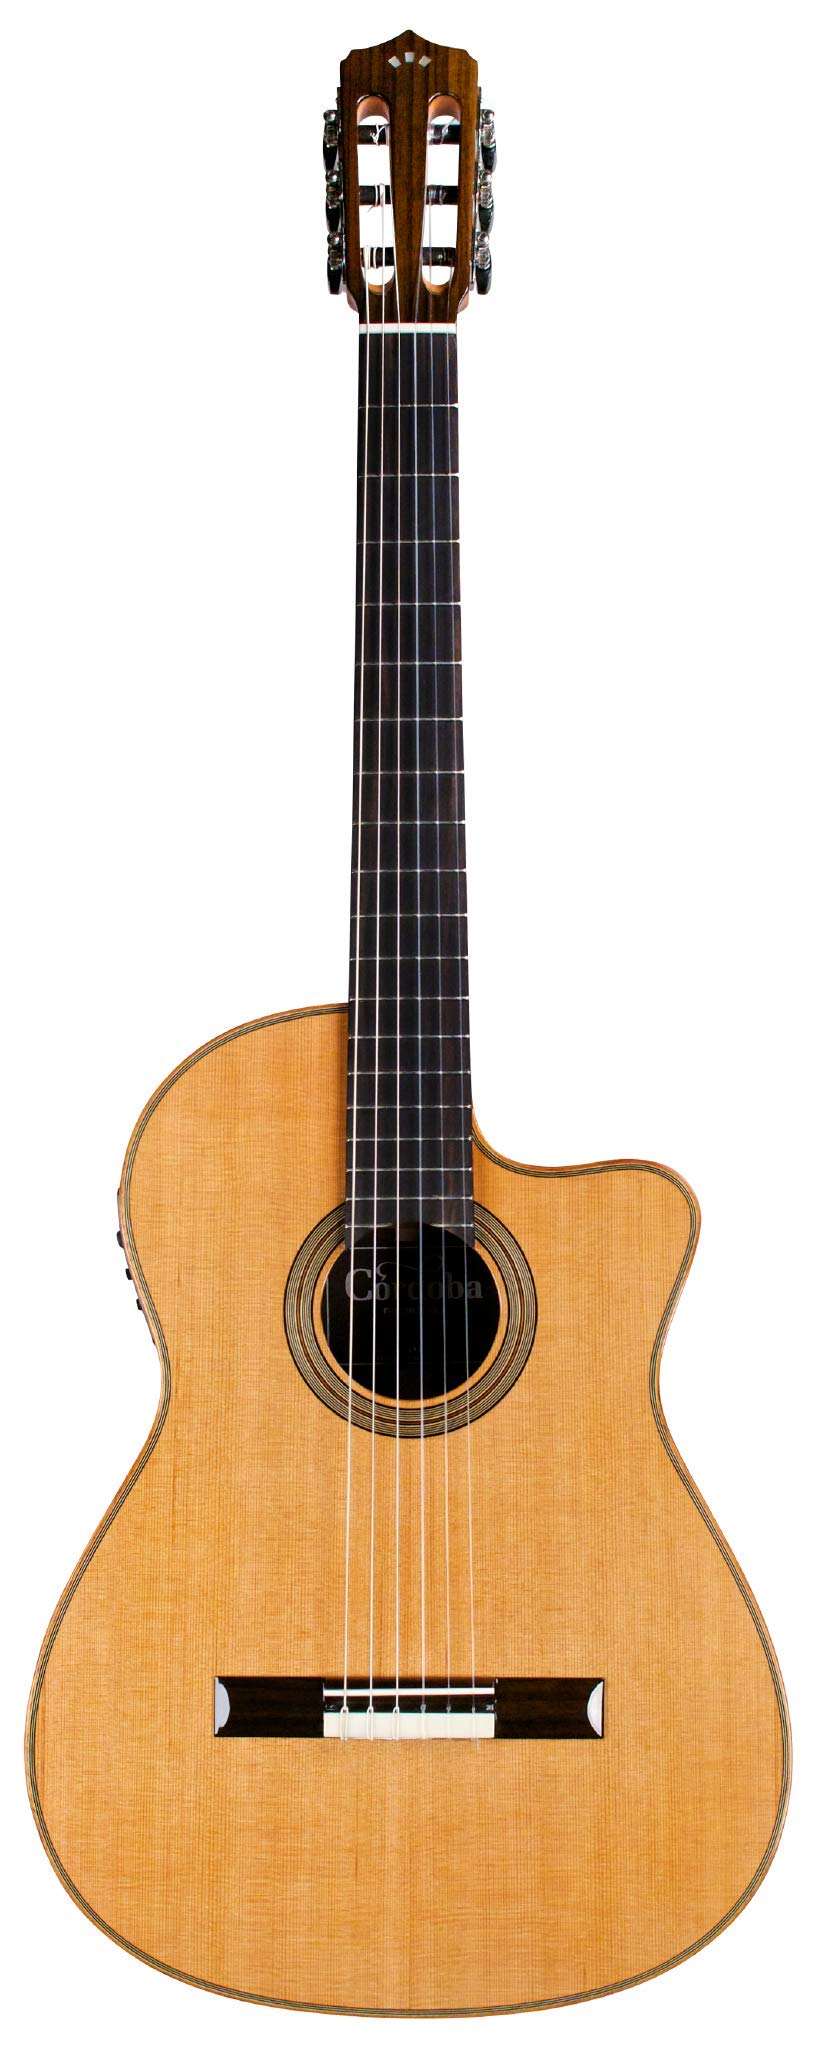 Cordoba Fusion Orchestra CE Cedar Classical Guitar - Solid Canadian Cedar Top, Rosewood Back & Sides with Pickup & Gator Guitar Case